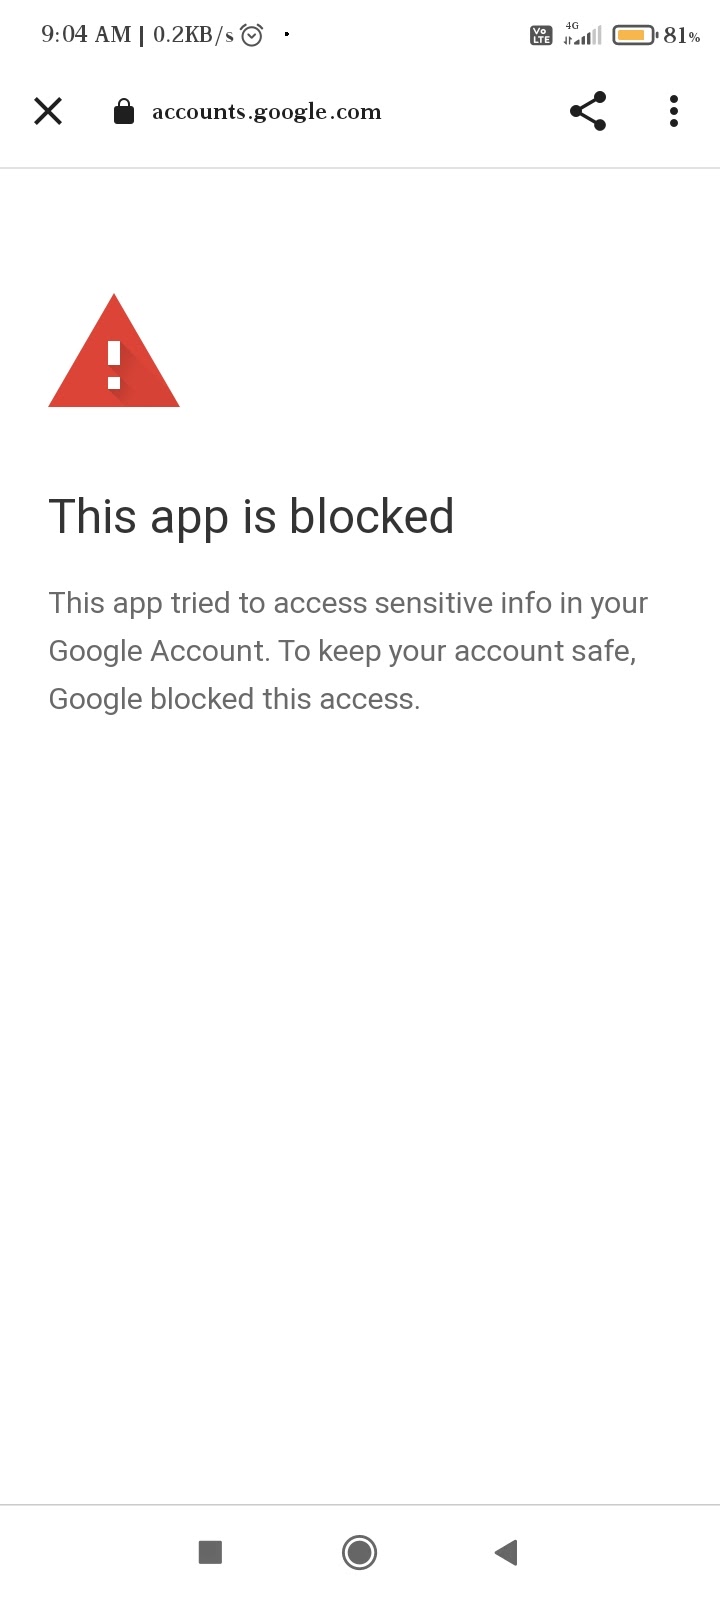 Why Google is blocked?